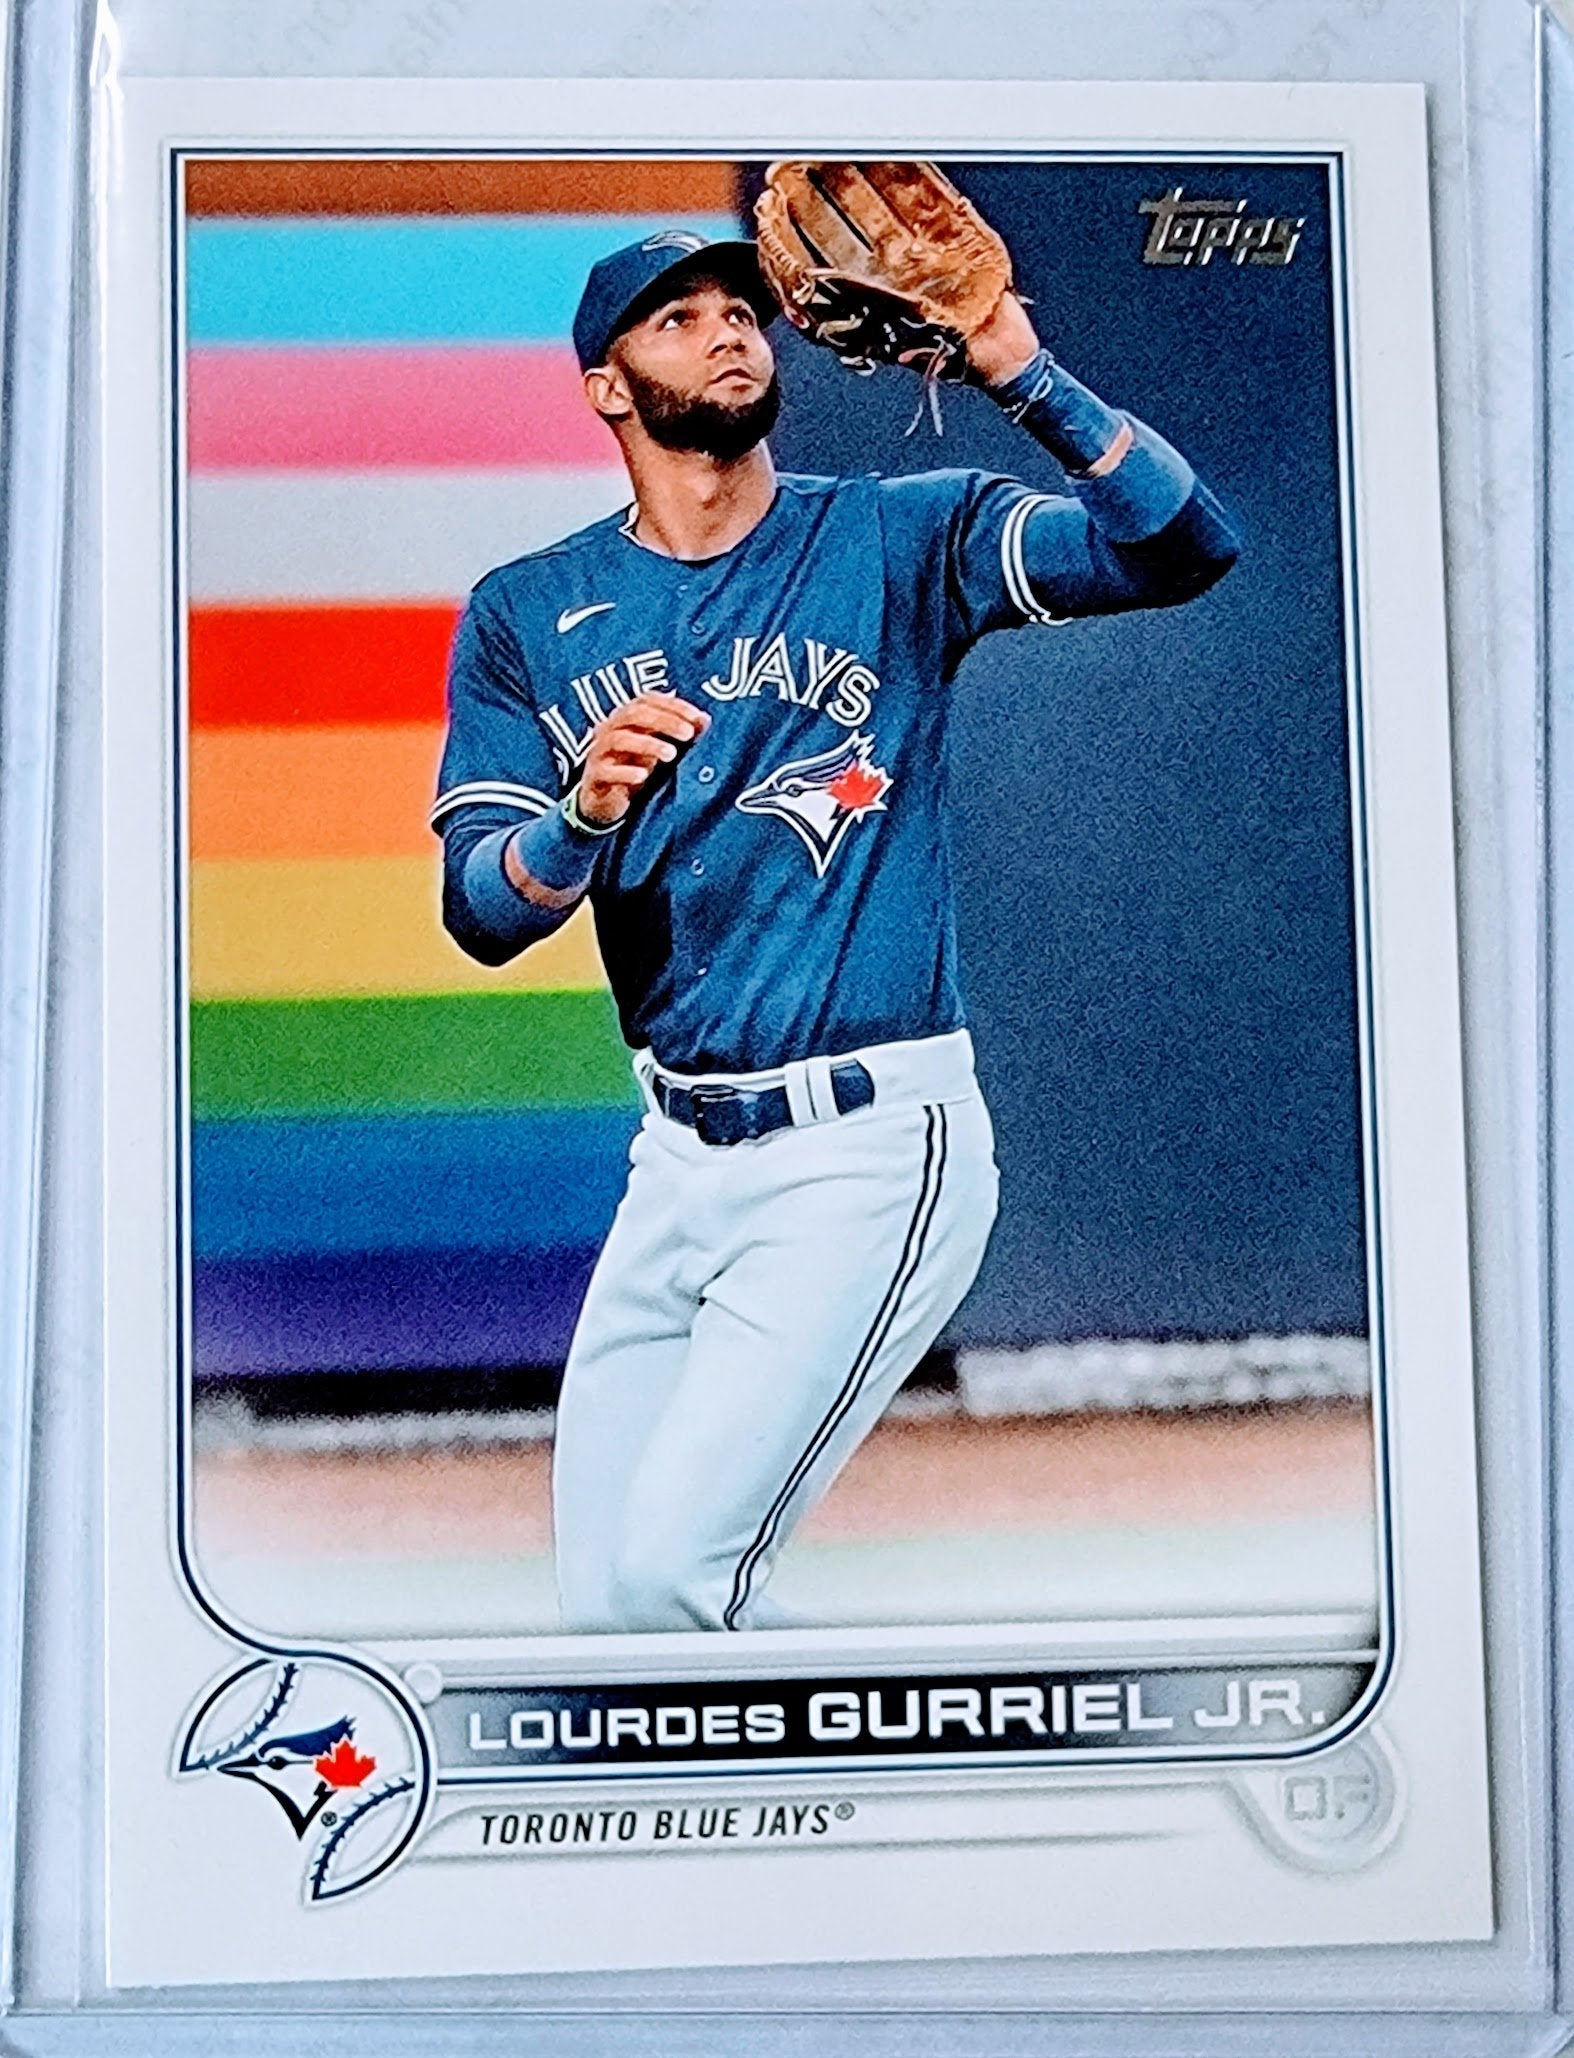 2022 Topps Lourdes Gurriel Jr Baseball Trading Card GRB1 simple Xclusive Collectibles   